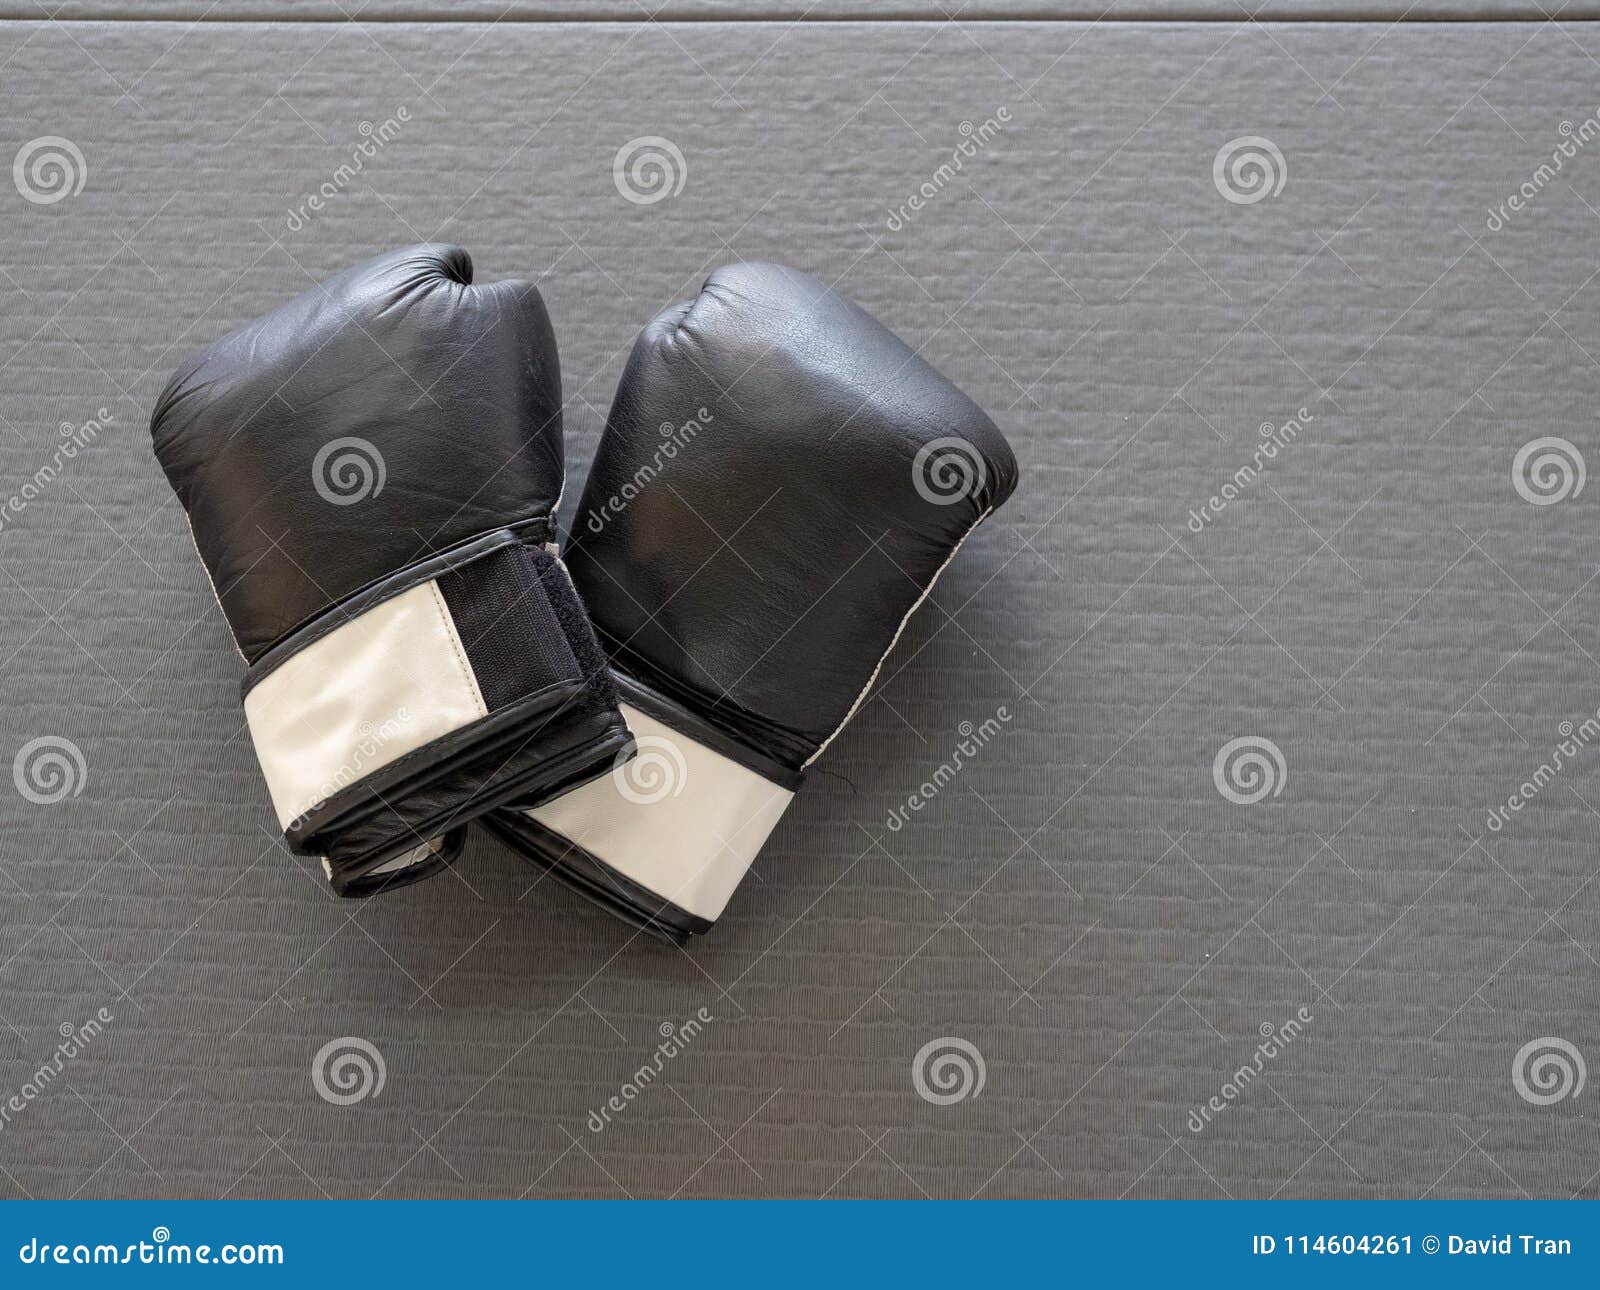 Download High View Of Black Boxing Gloves Sitting On Mats Grey Of ...